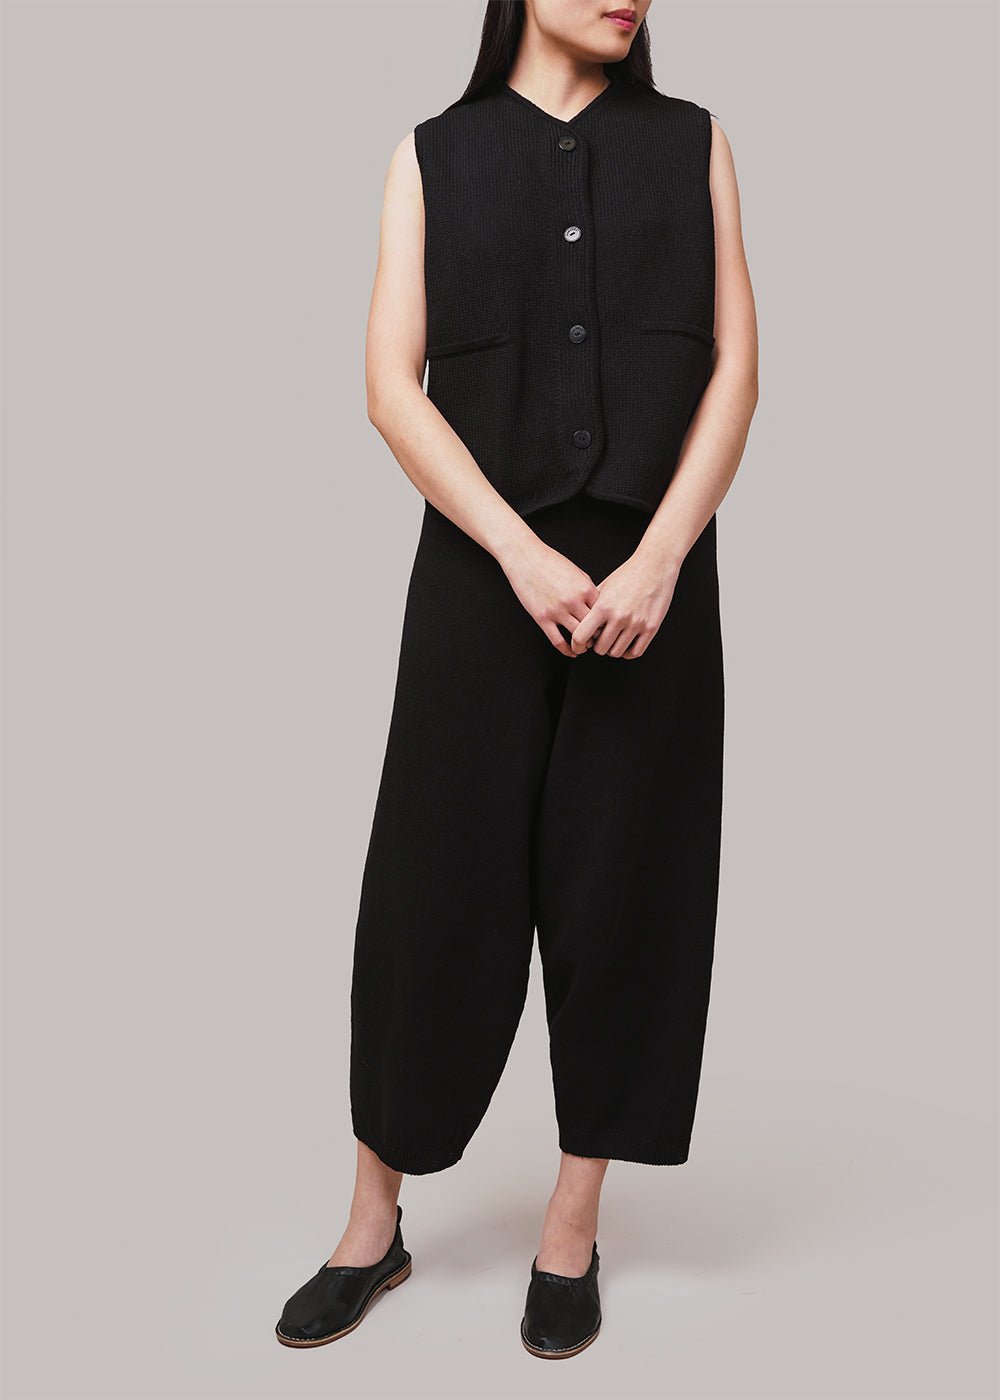 Cordera Black Cotton Knitted Pants - New Classics Studios Sustainable Ethical Fashion Canada